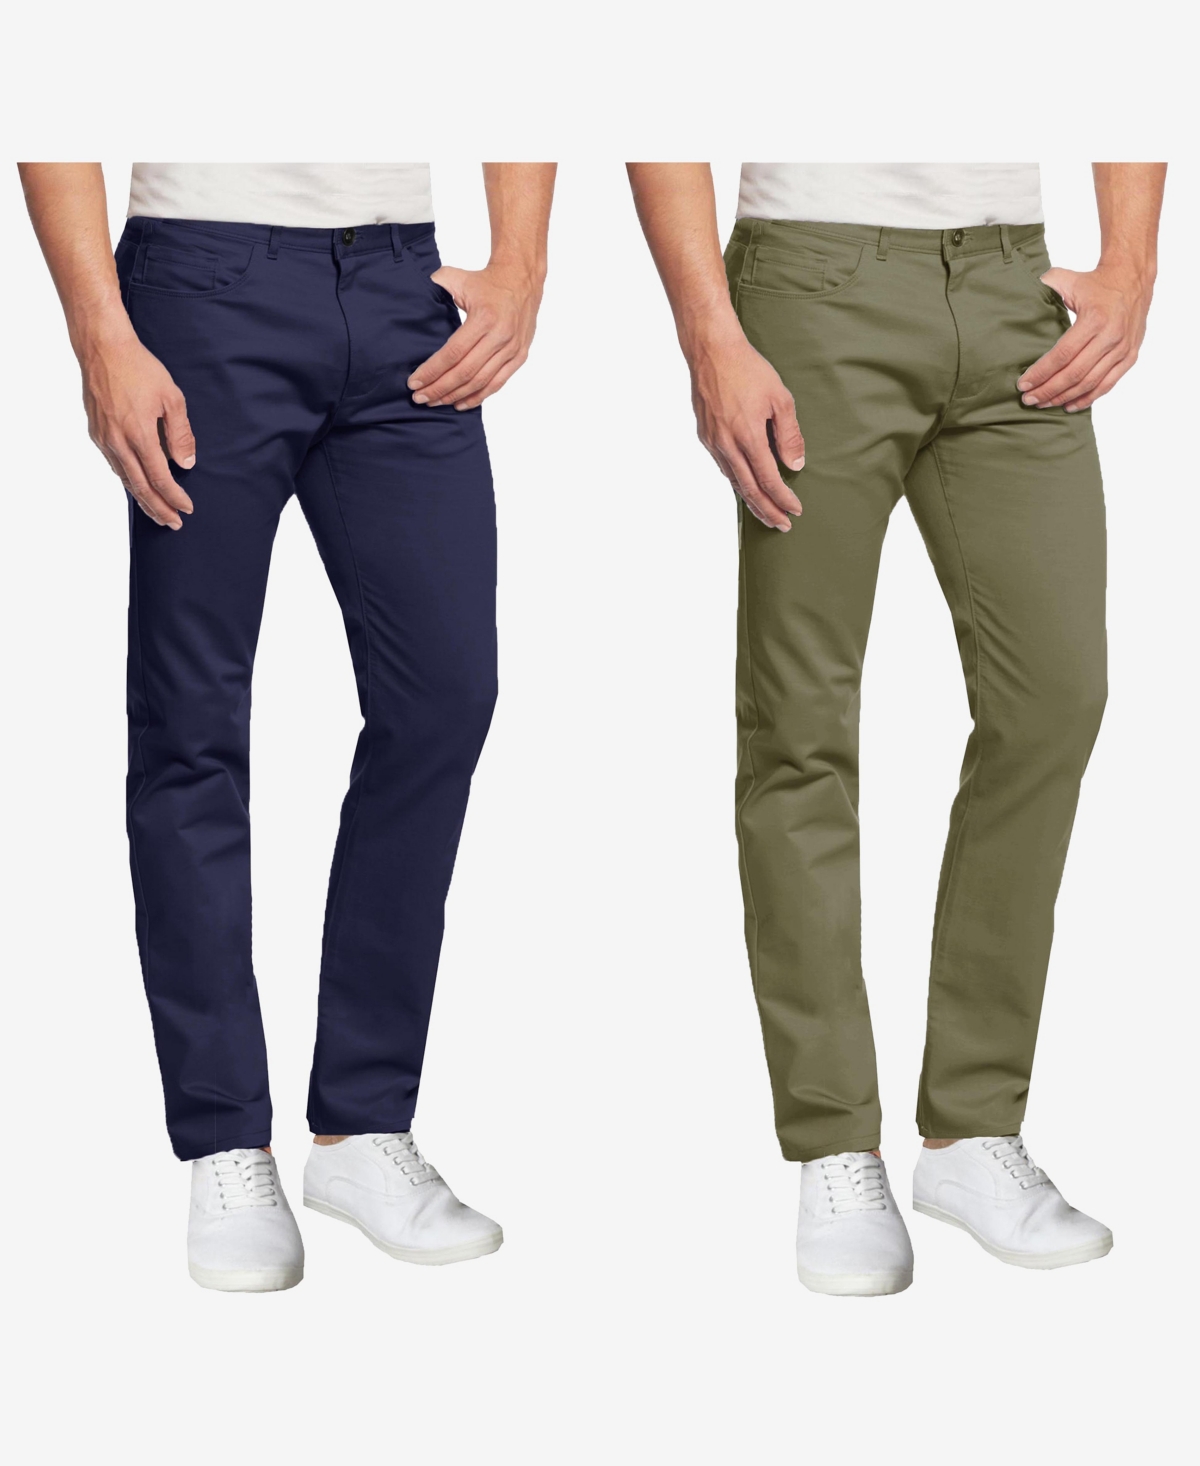 Galaxy By Harvic Men's 5-pocket Ultra-stretch Skinny Fit Chino Pants, Pack Of 2 In Olive,navy